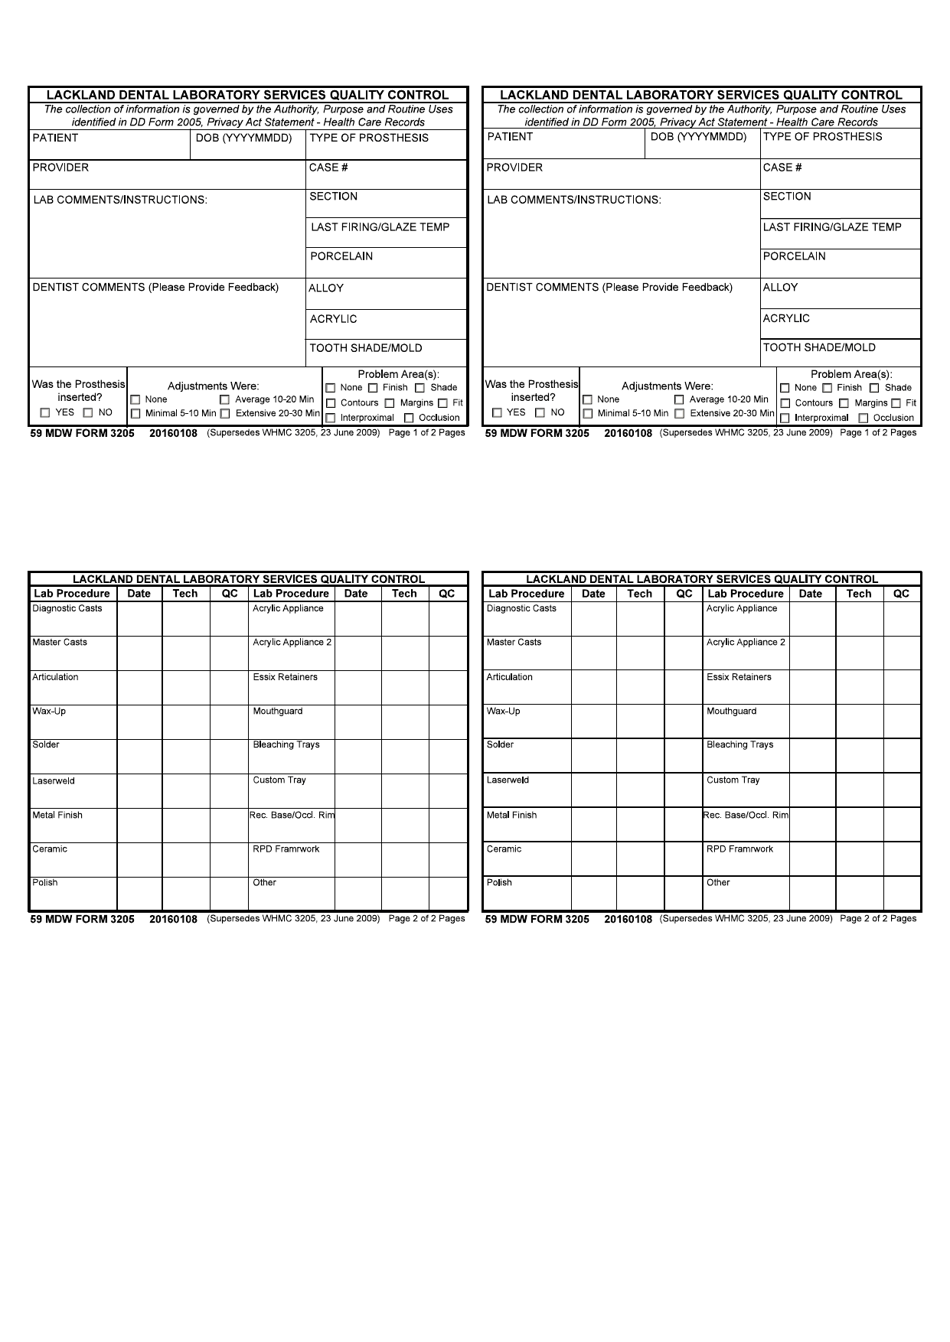 59 MDW Form 3205 Lackland Dental Laboratory Services Quality Control, Page 1